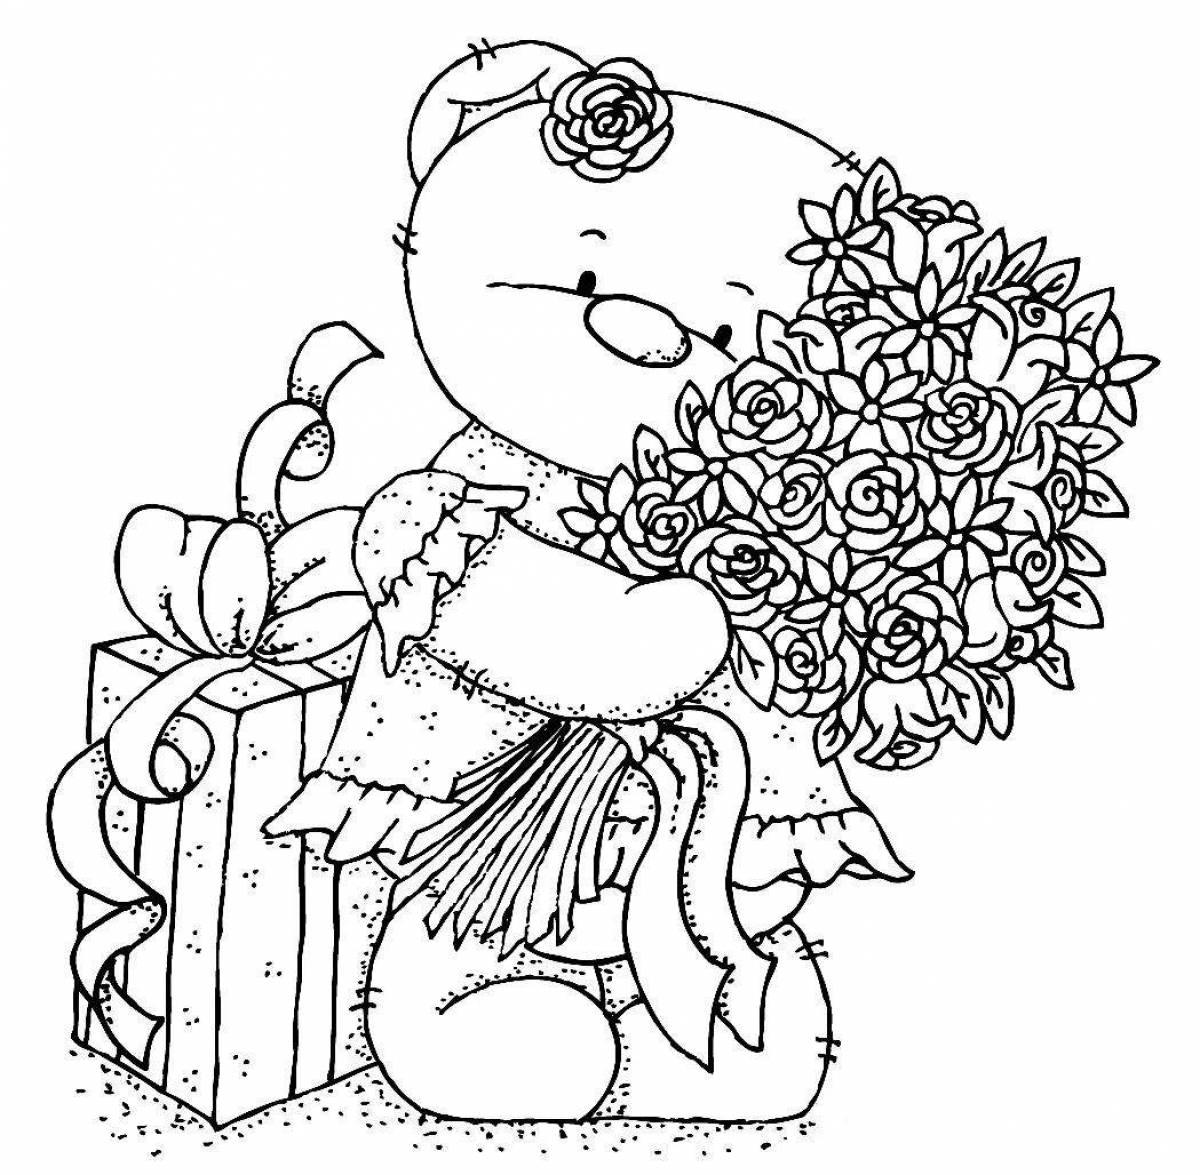 Coloring page excited bear with a gift